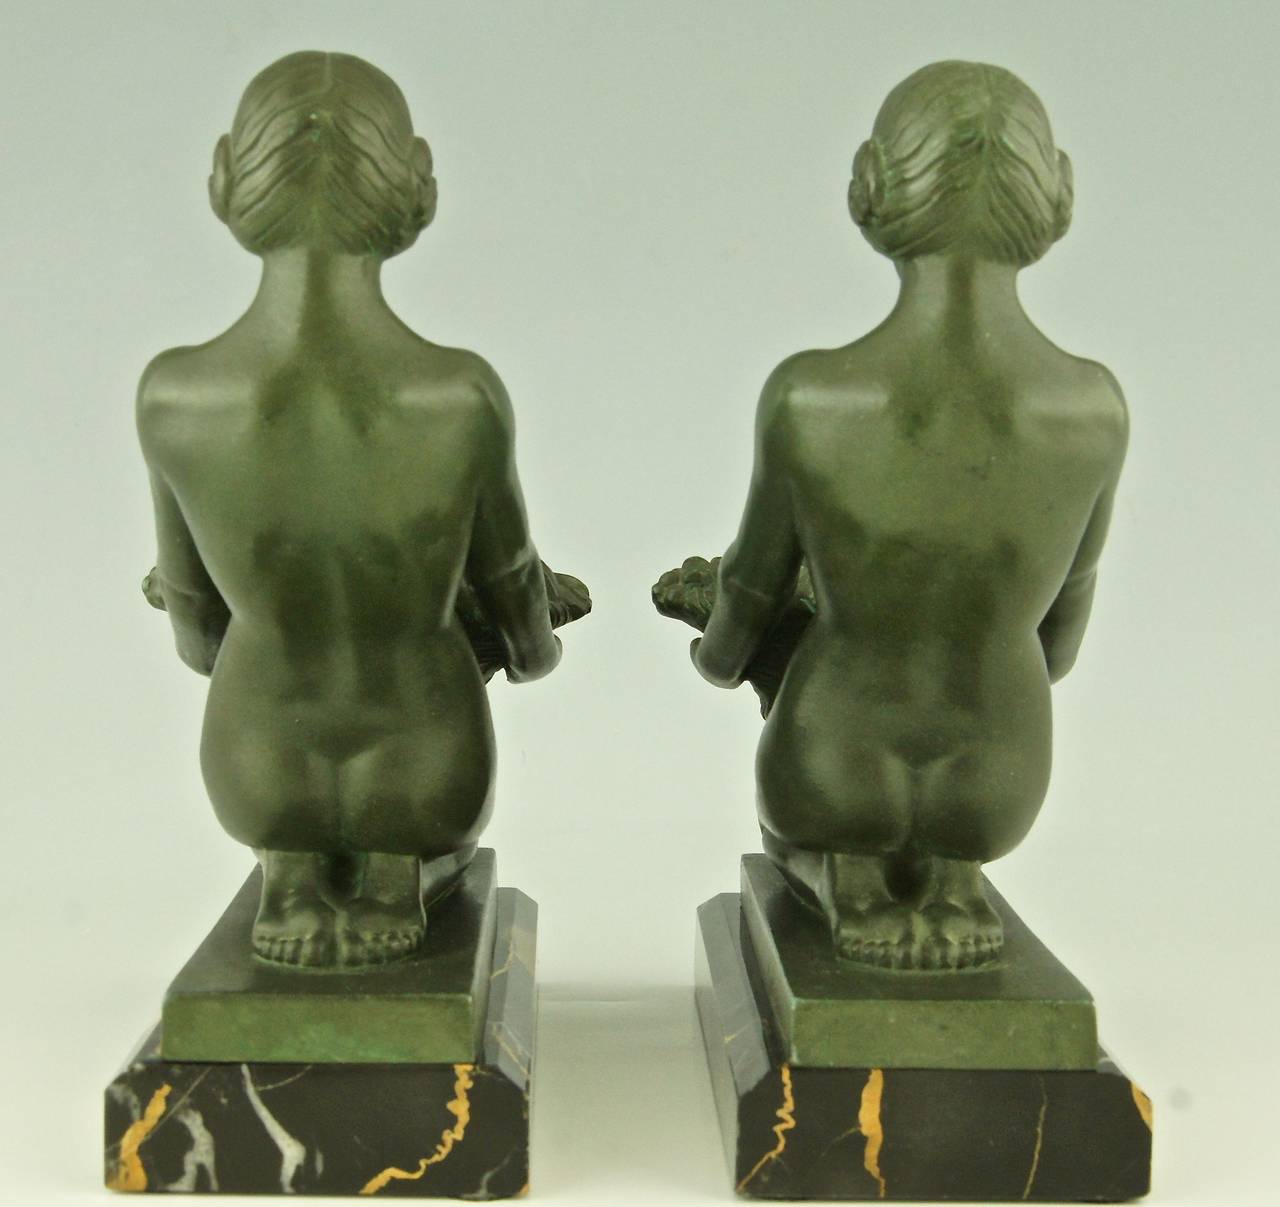 French Art Deco Bookends with Nudes by Max Le Verrier, France, 1930